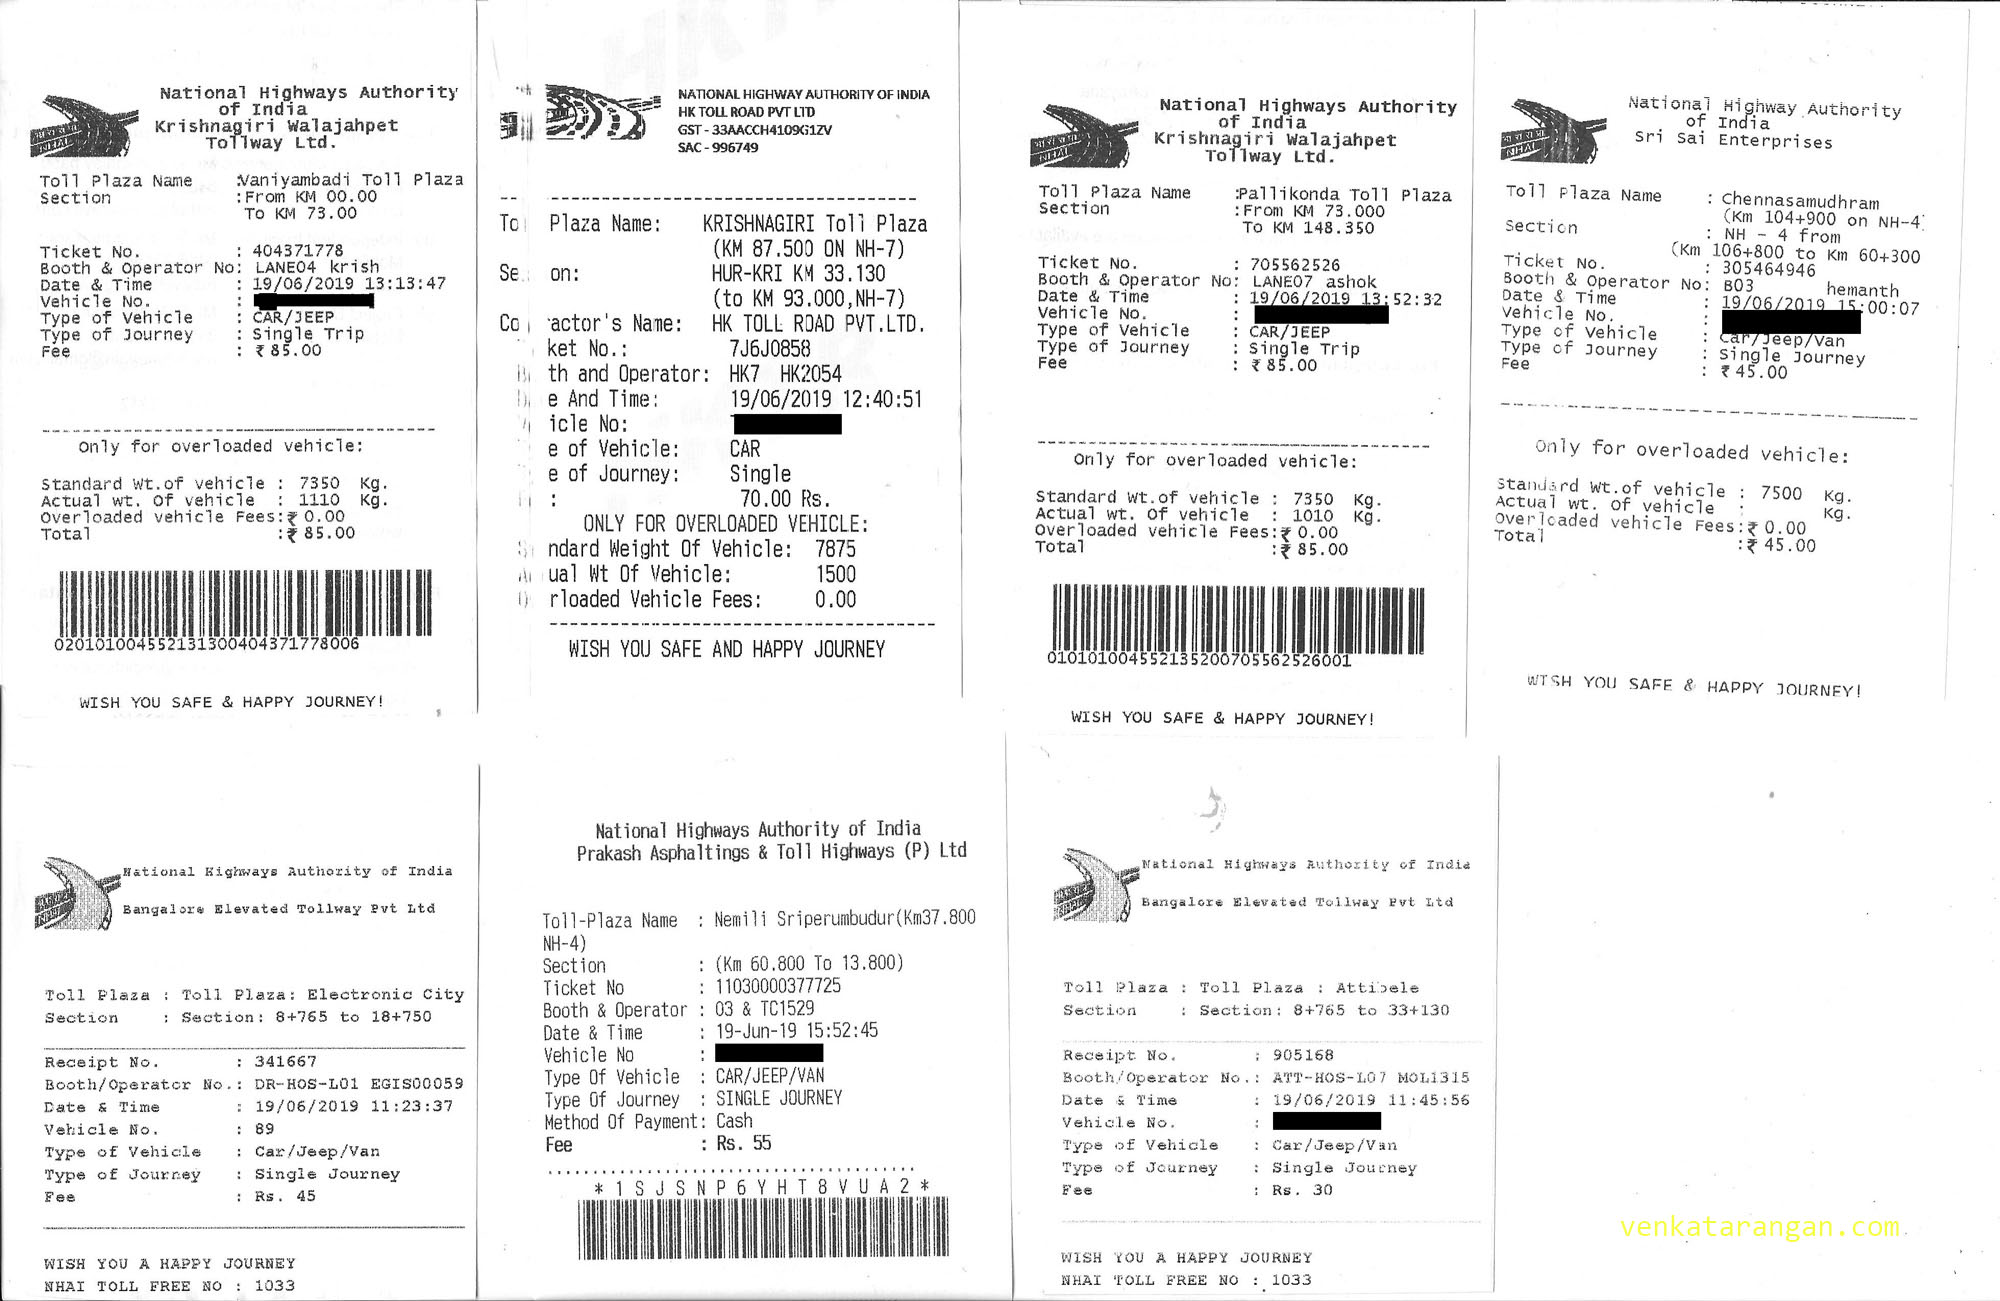 Highway toll tickets - Bangalore to Chennai - Rs.415 in total